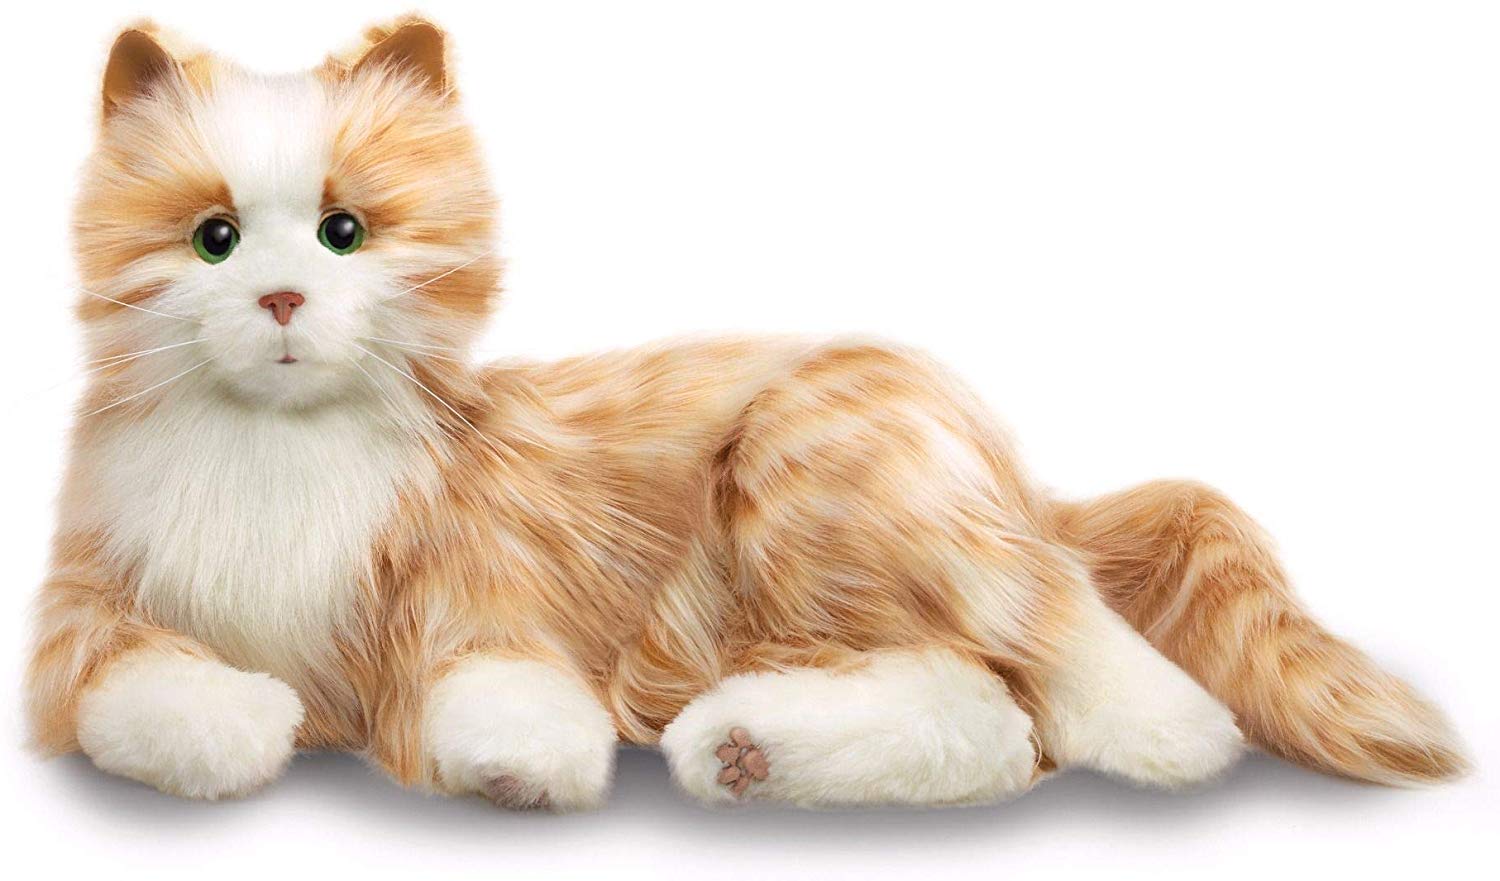 JOY FOR ALL Realistic Purring Cat Stuffed Animal, 10-Inch